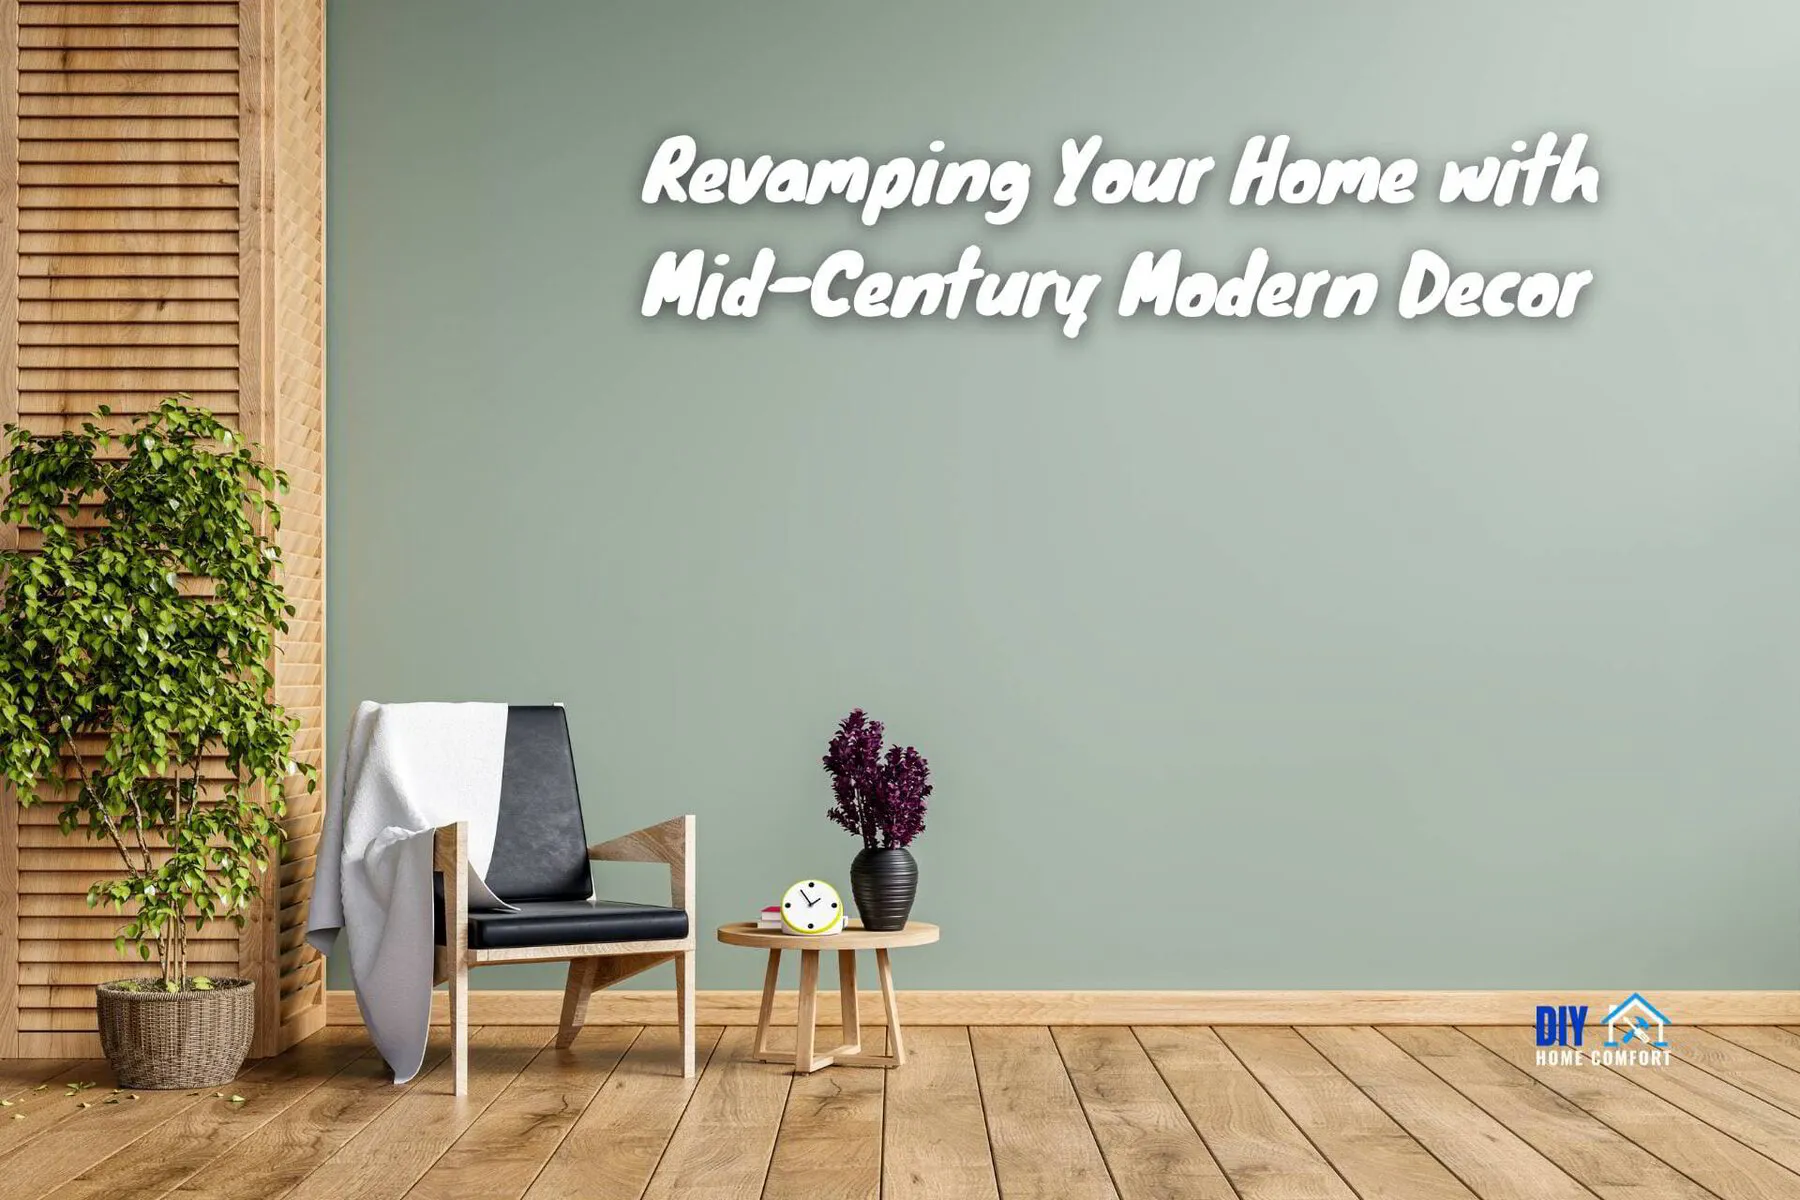 Revamping Your Home with Mid-Century Modern Decor | DIY Home Comfort